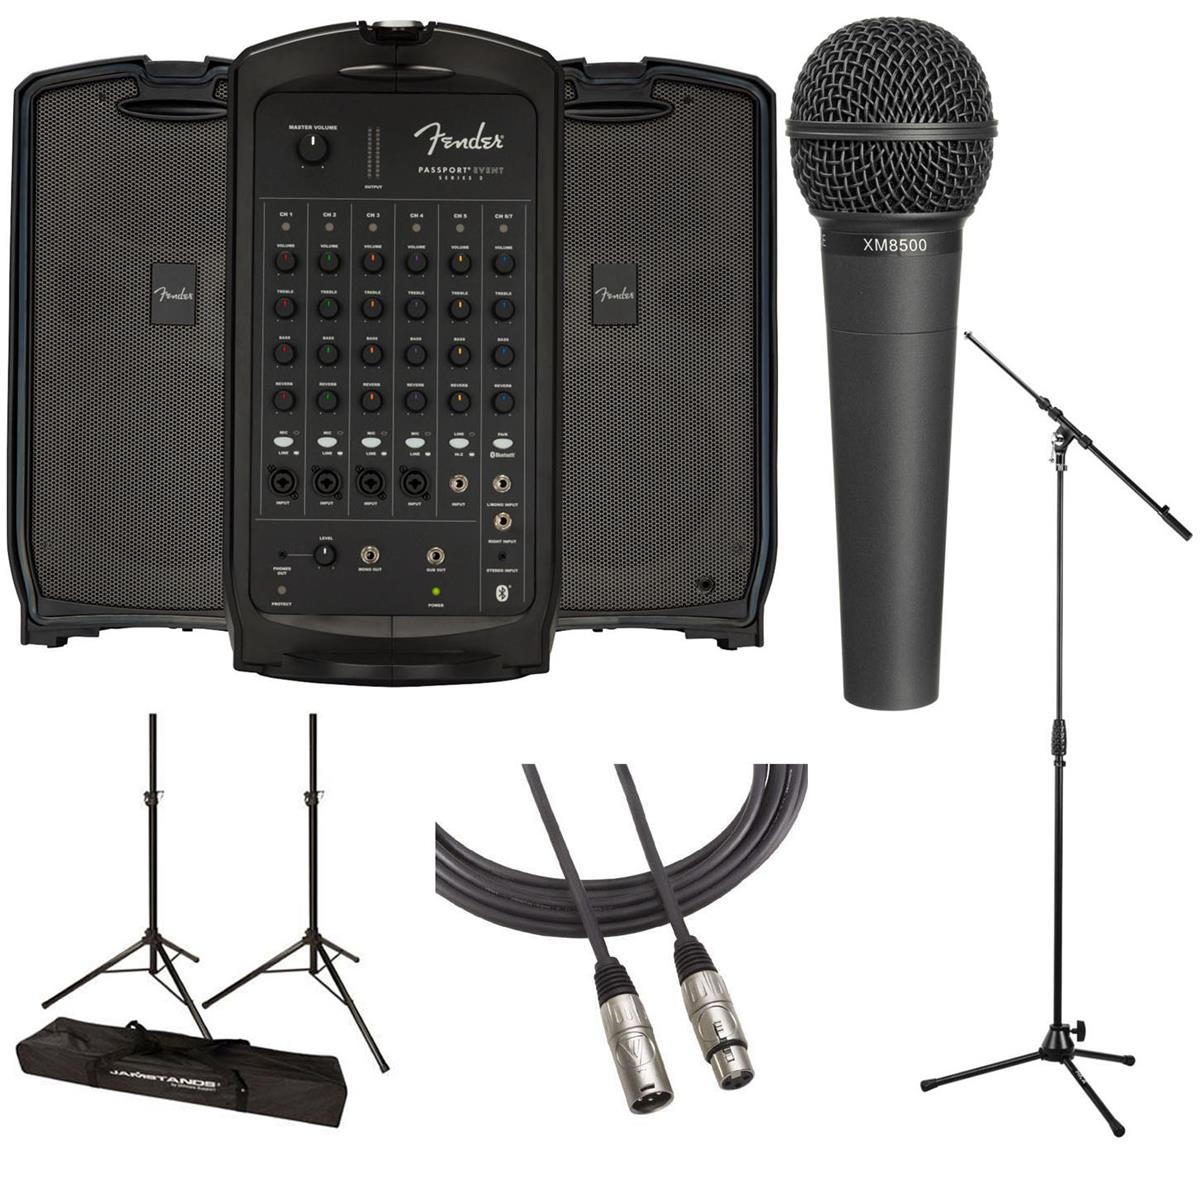 Fender Passport Event Series 2 375W 7-CH PA System with Stands, Mic, Cable -  6943000000 B